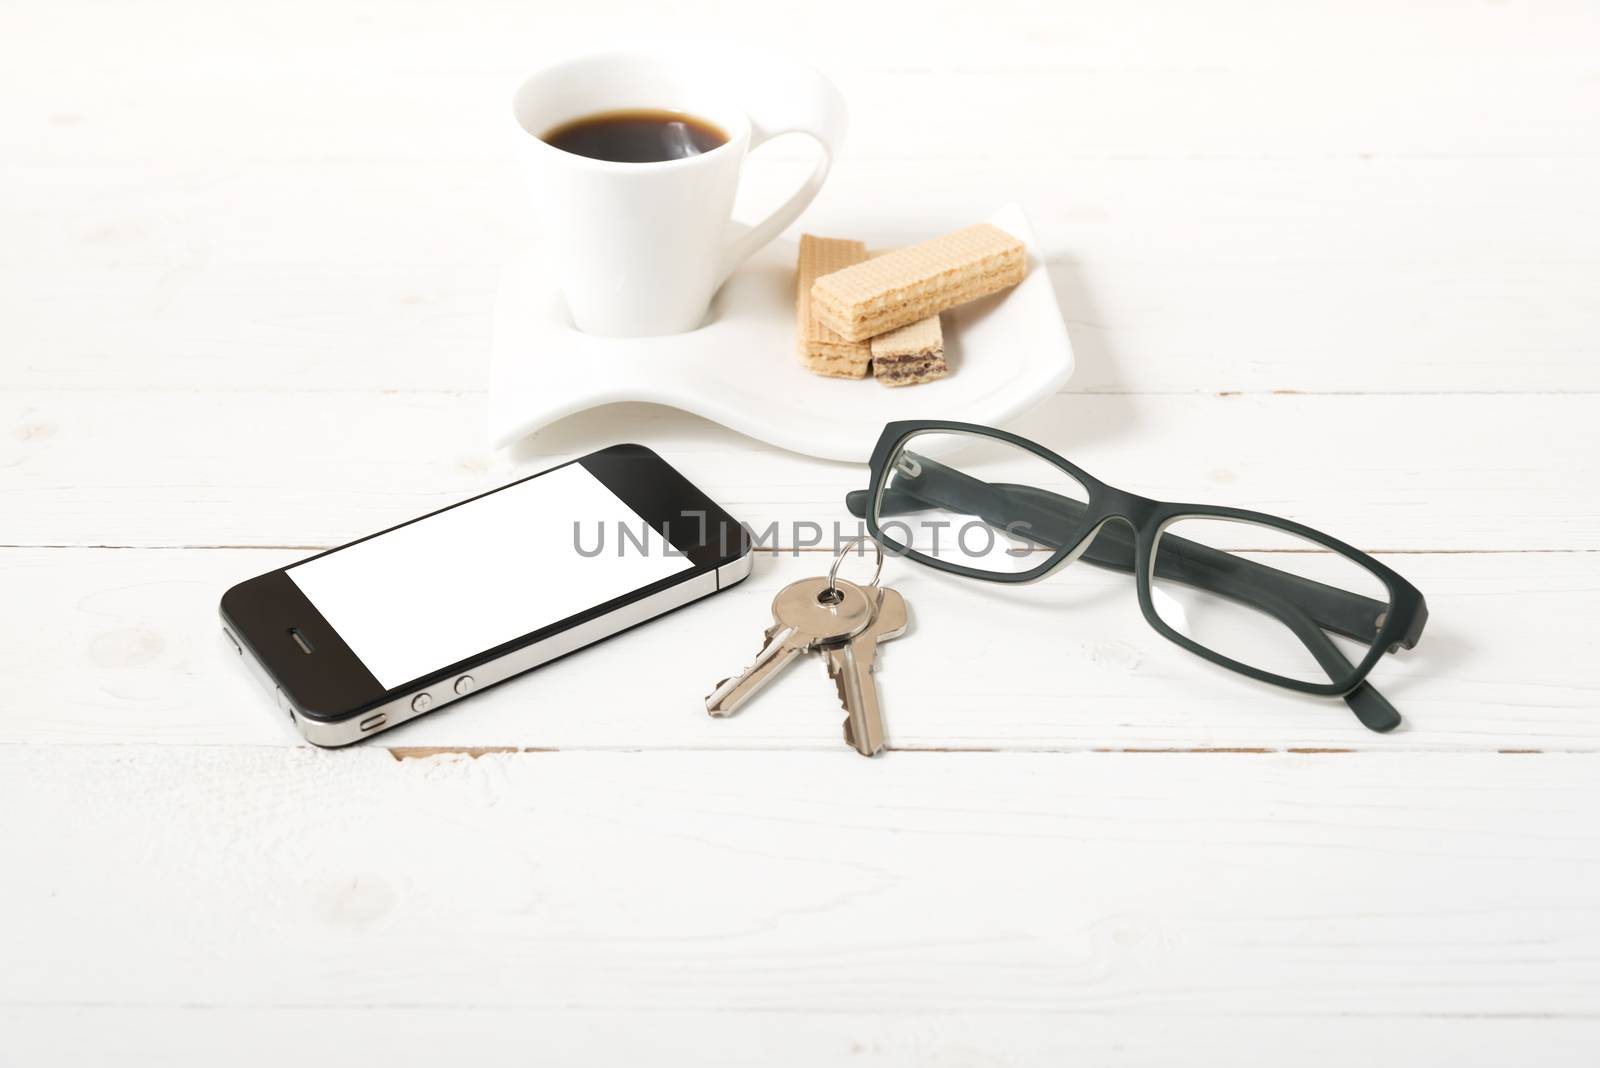 coffee cup with wafer,phone,key,eyeglasses by ammza12